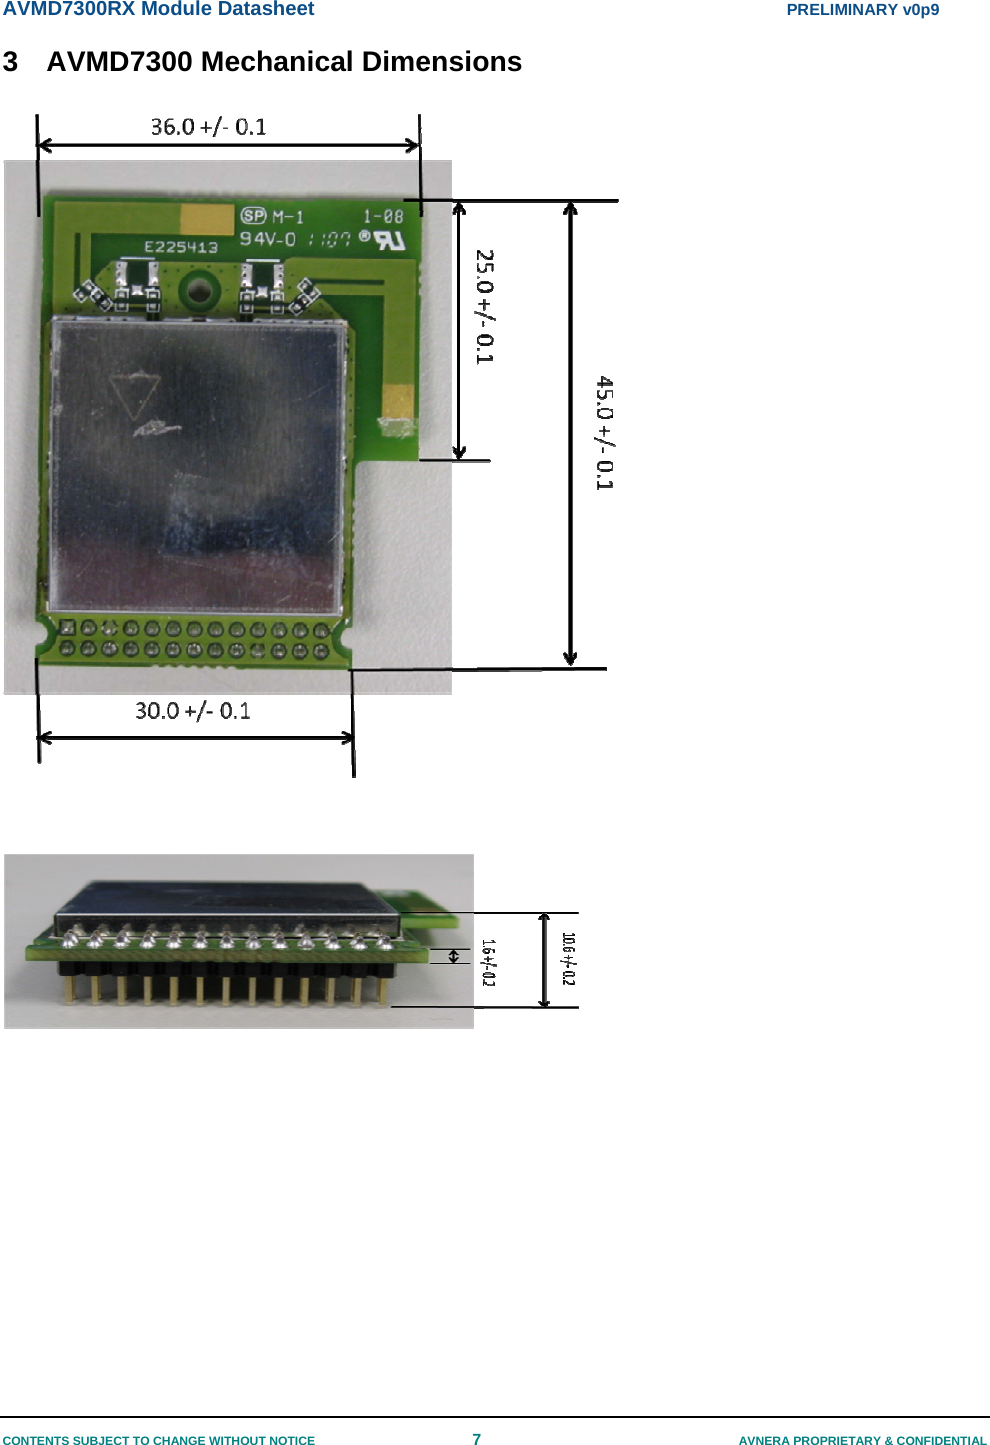 AVMD7300RX Module Datasheet  PRELIMINARY v0p9 CONTENTS SUBJECT TO CHANGE WITHOUT NOTICE  7  AVNERA PROPRIETARY &amp; CONFIDENTIAL 3  AVMD7300 Mechanical Dimensions          